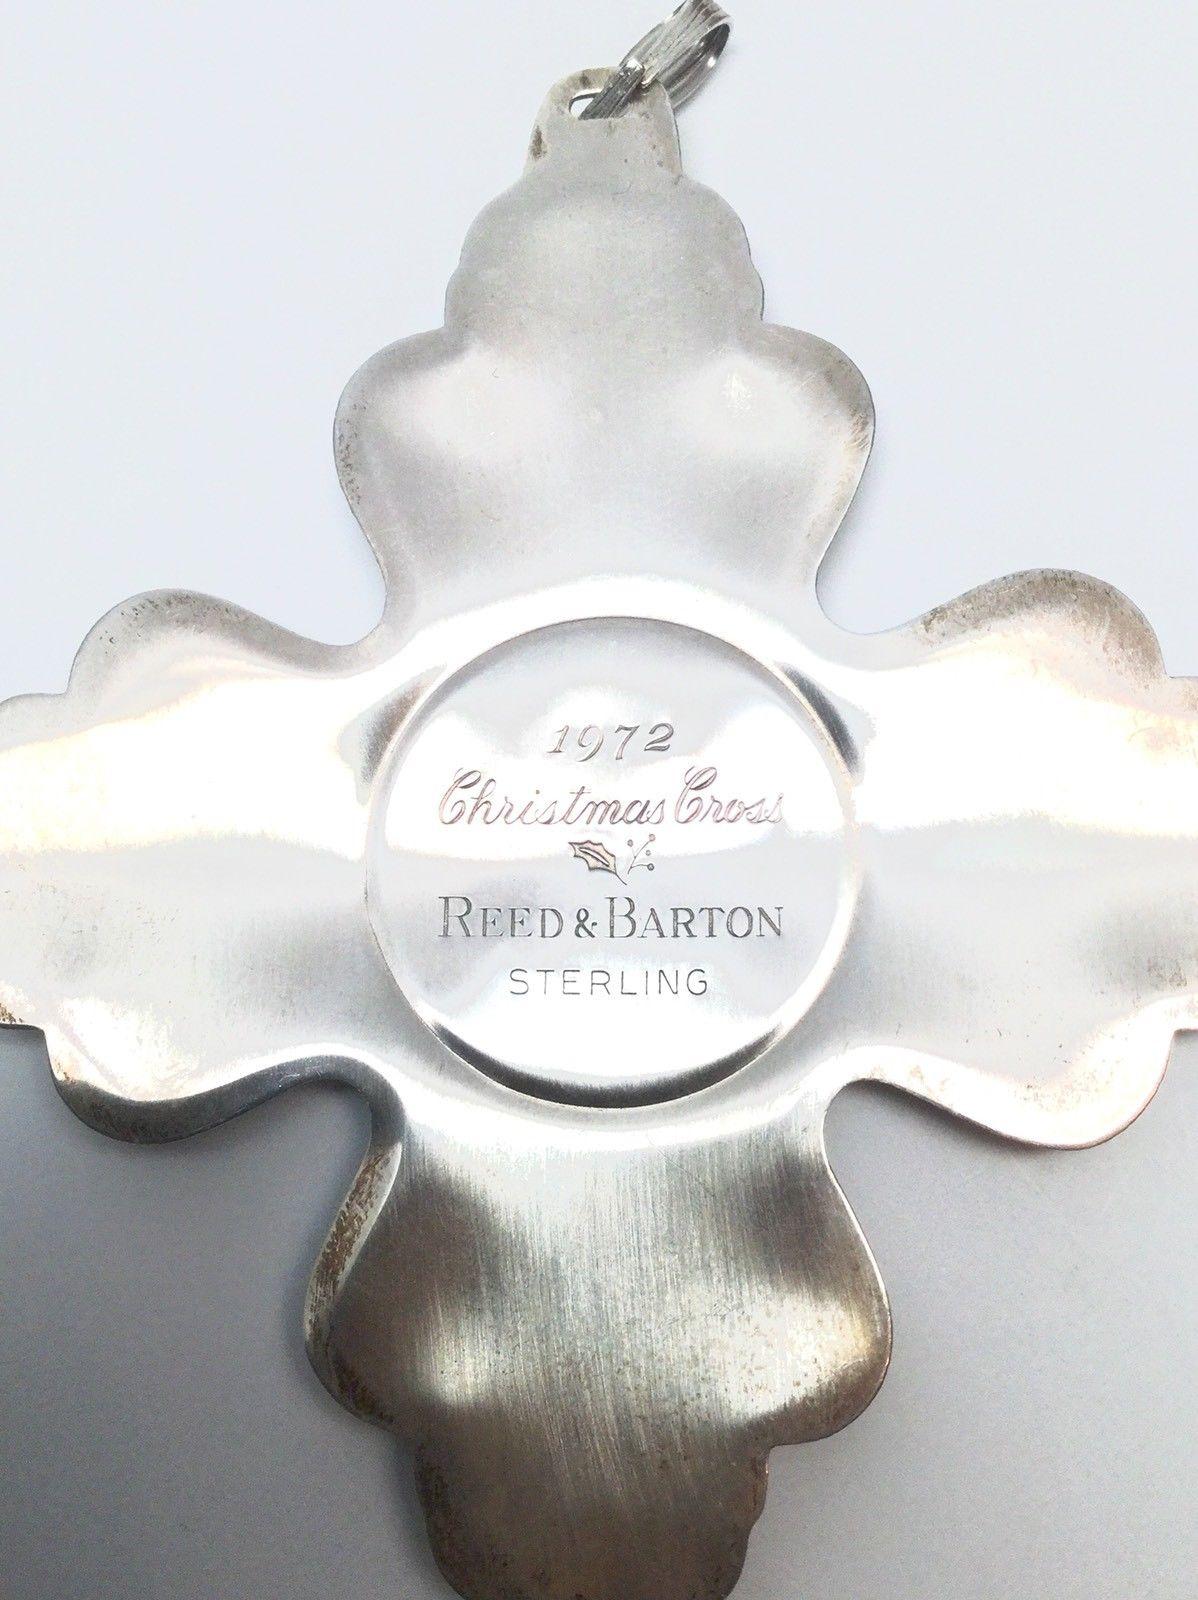 1972 Reed & Barton sterling silver Christmas cross ornament. A wonderful 1972 Reed & Barton sterling silver Christmas cross pendant. This stunning sterling cross is designed with equal length arms, with curvy scalloped outer border, and an inner